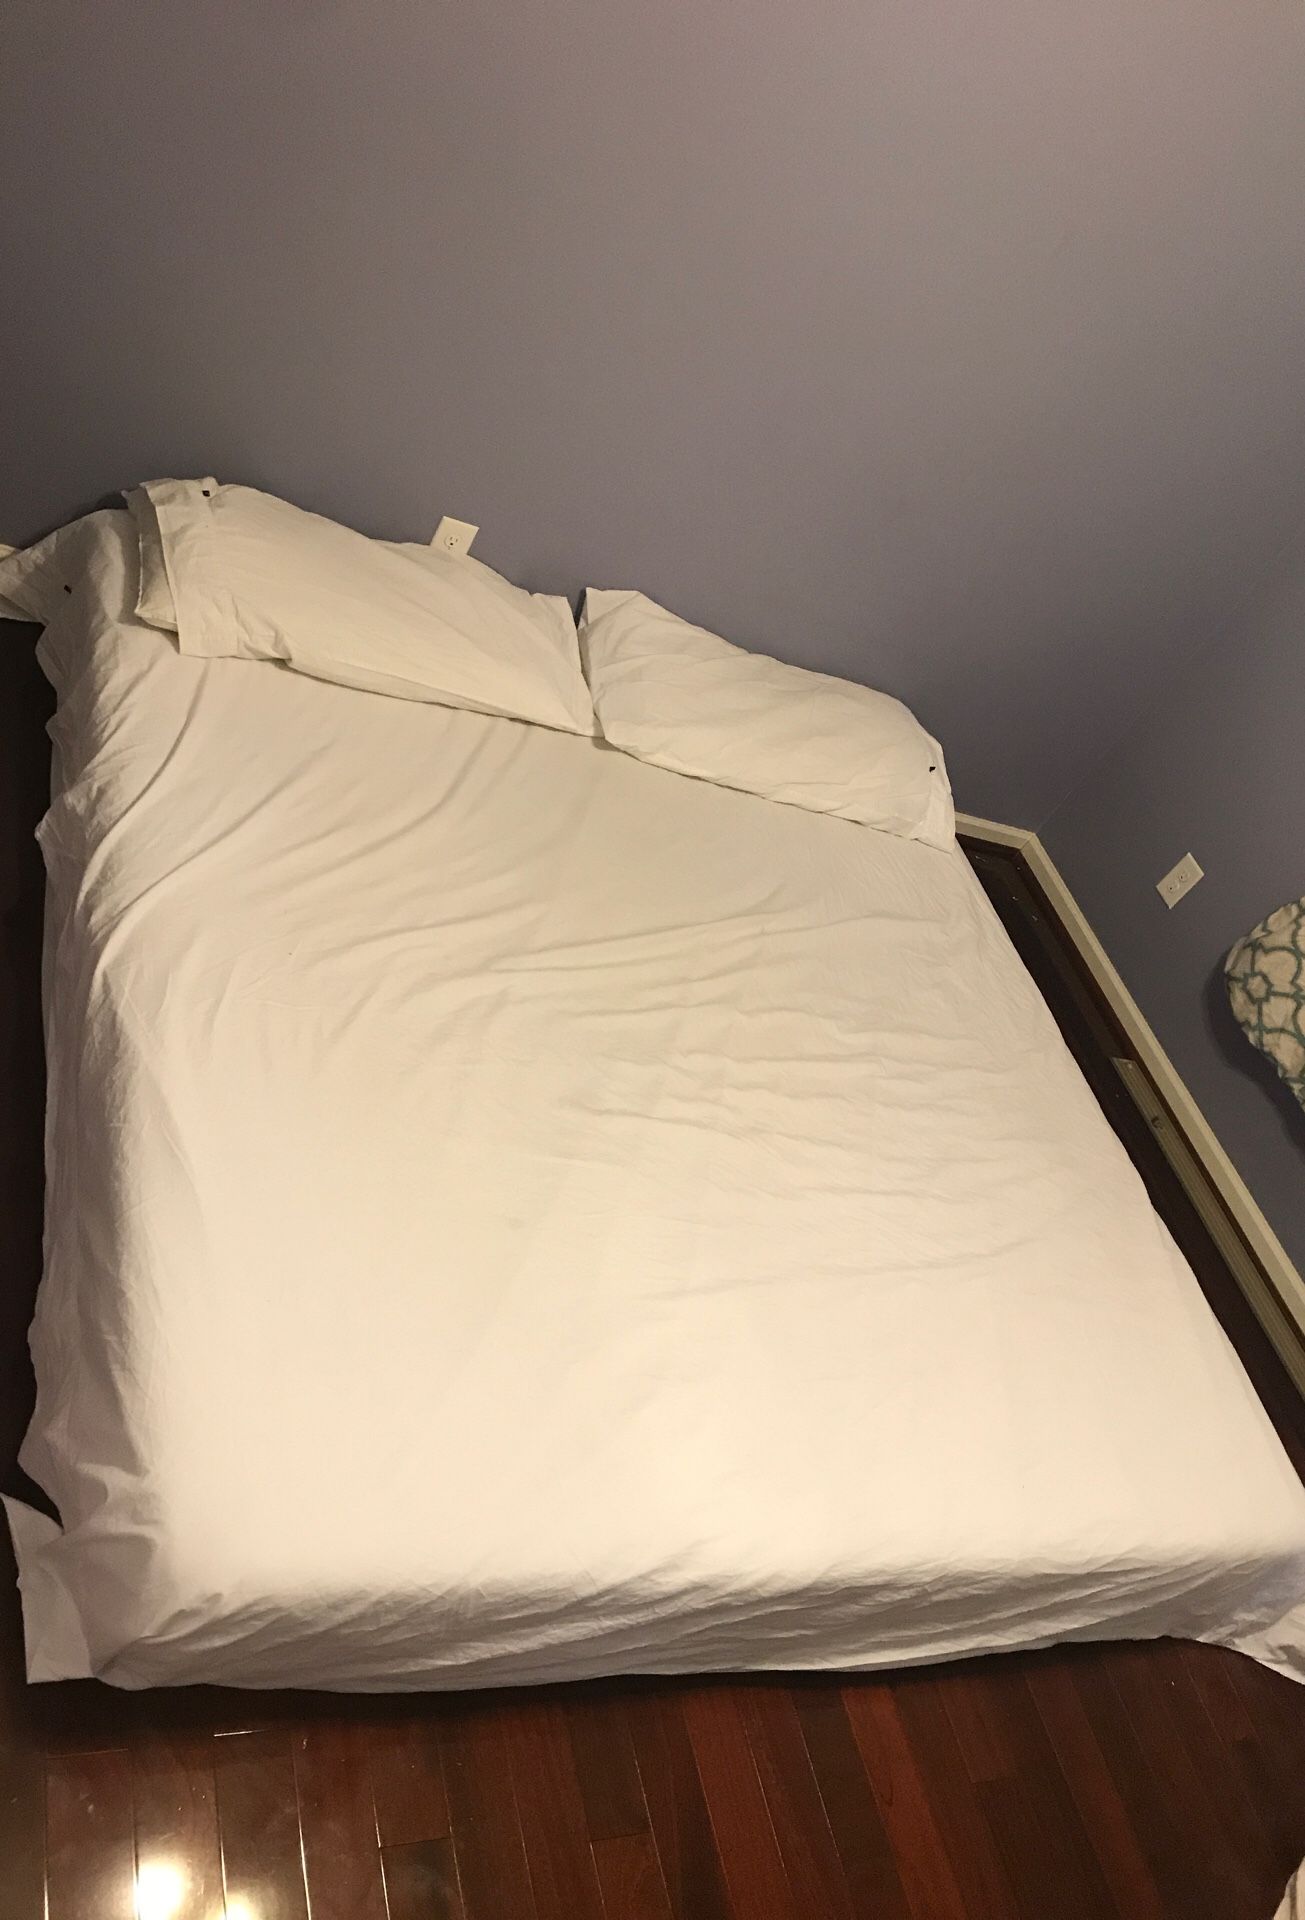 Mattress King size for free